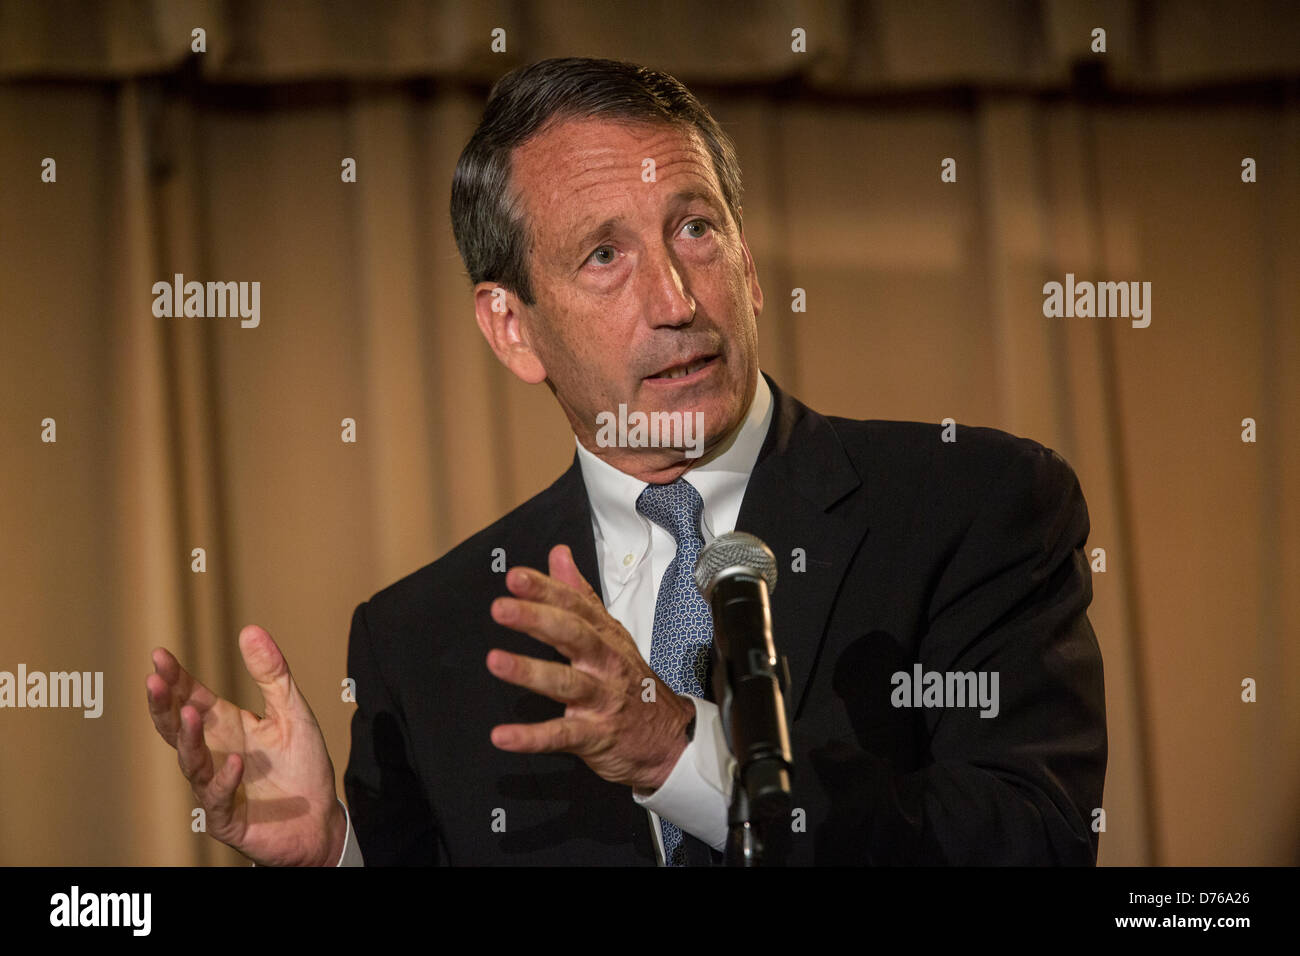 Former South Carolina Gov. Mark Sanford, the Republican candidate for the open Congressional seat, makes a point during a debate against his democratic opponent Elizabeth Colbert Busch at the Citadel on April 29, 2013 in Charleston, South Carolina. Stock Photo